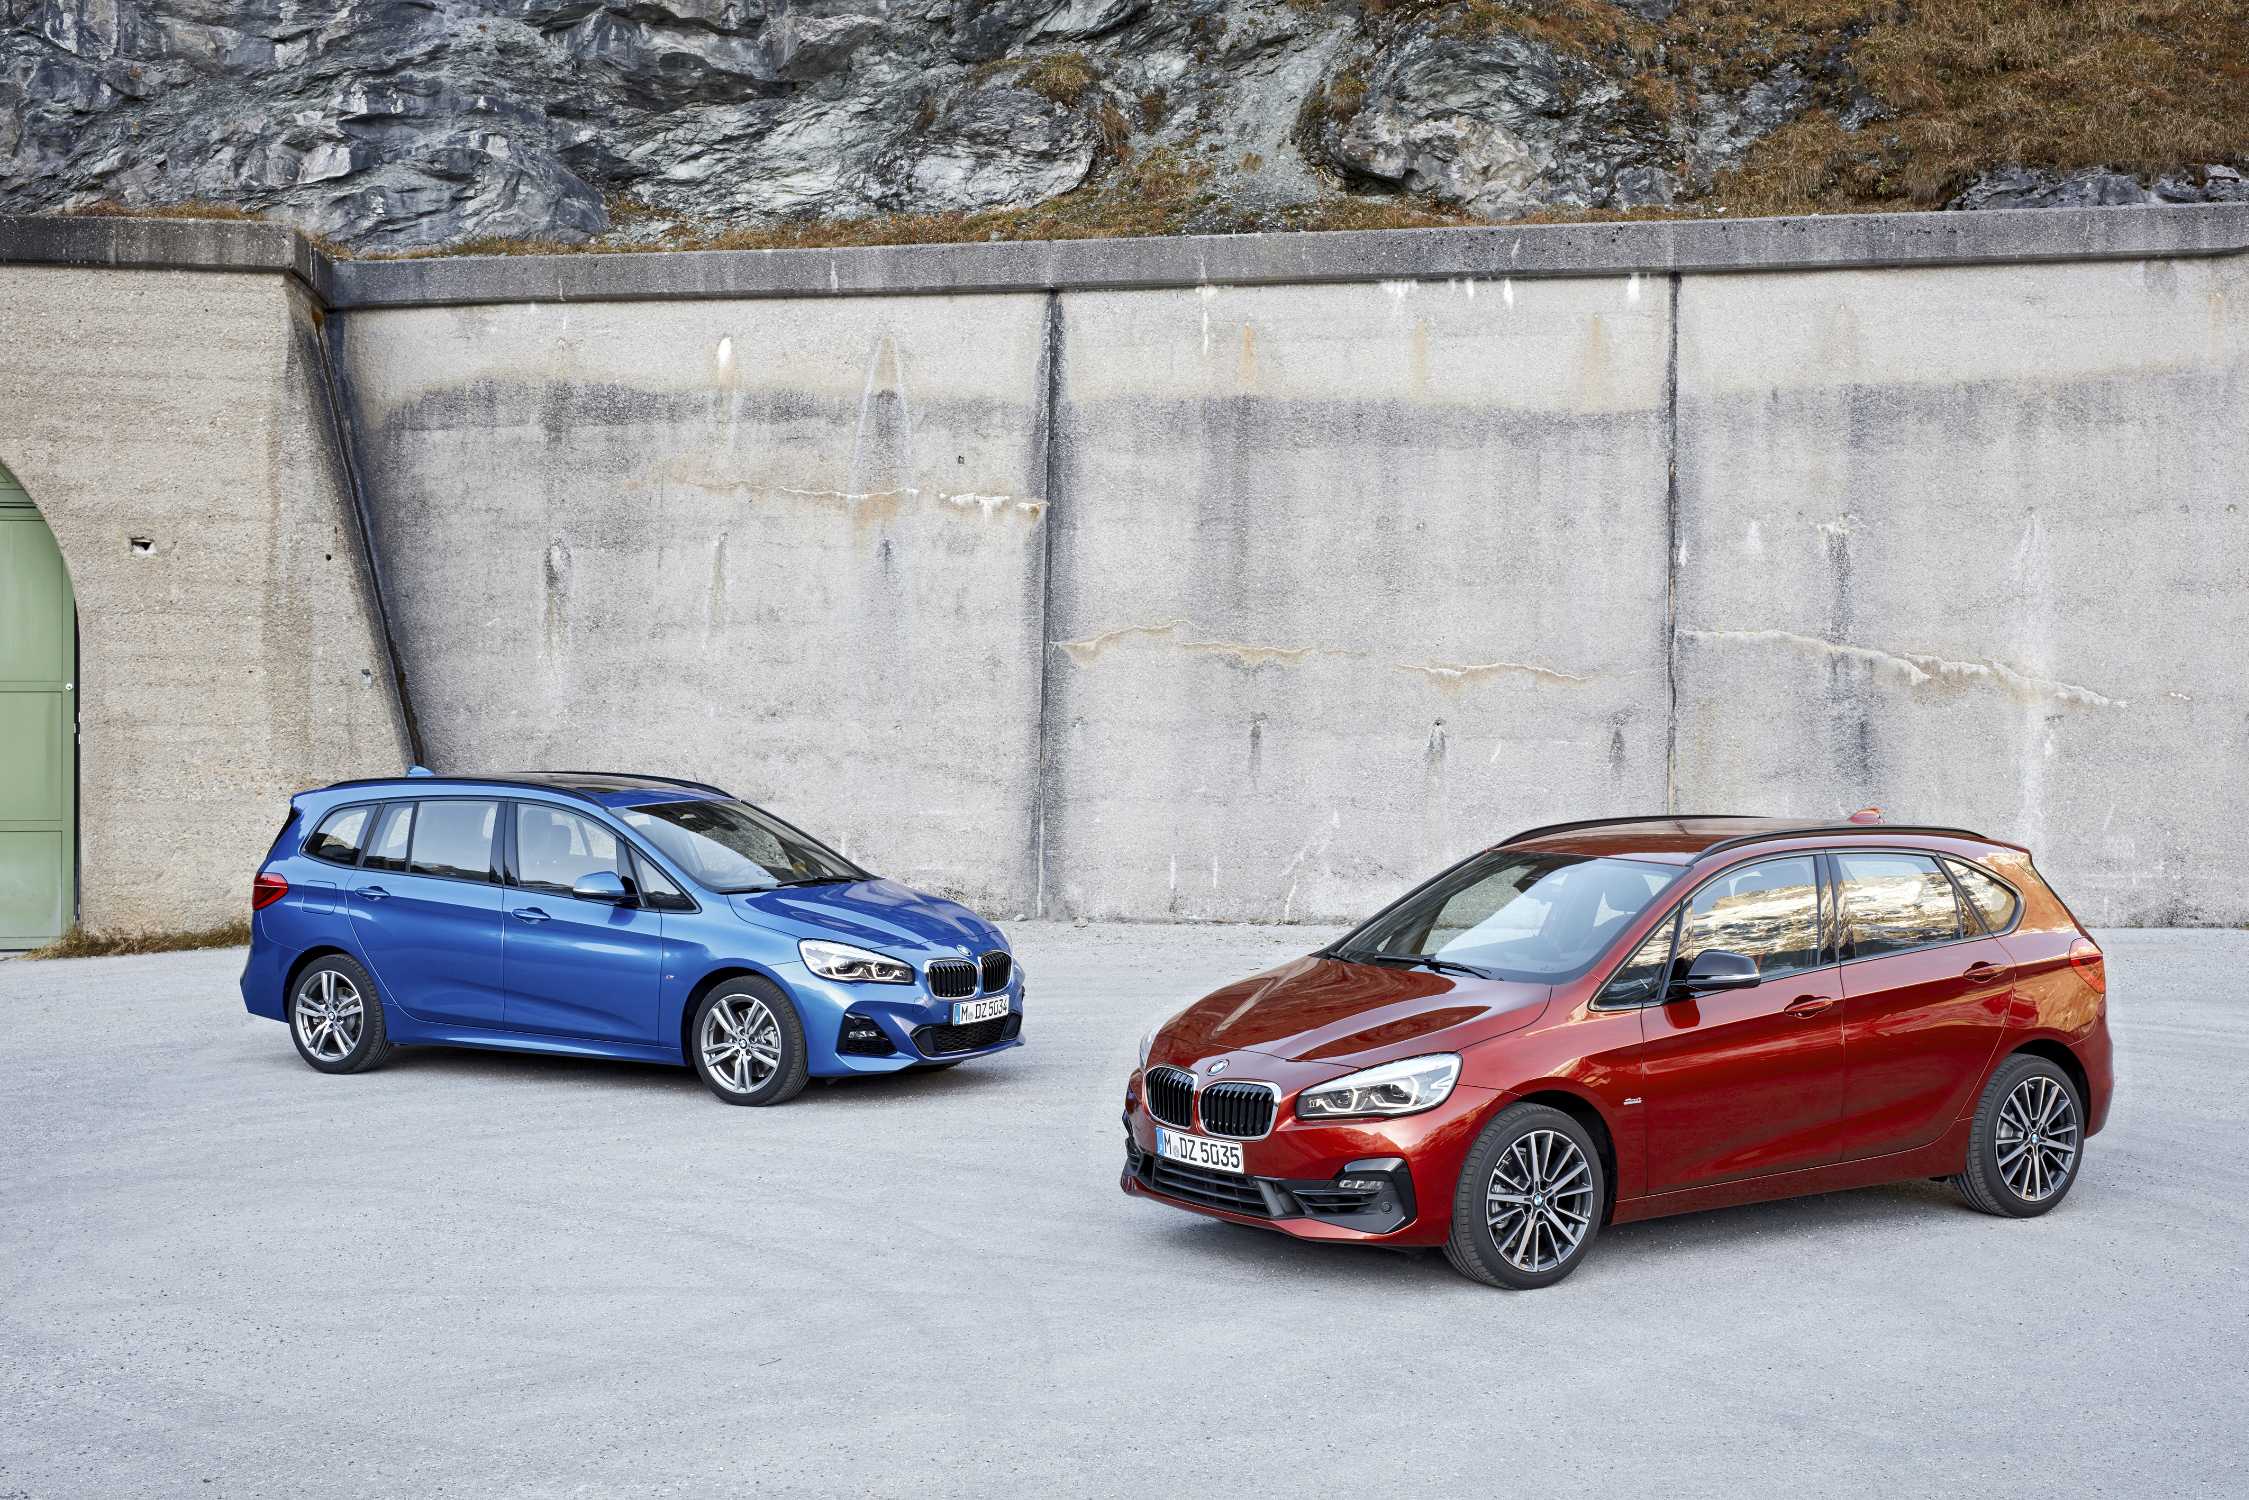 BMW 2 Series Active Tourer - Better Looking Than The First Generation?